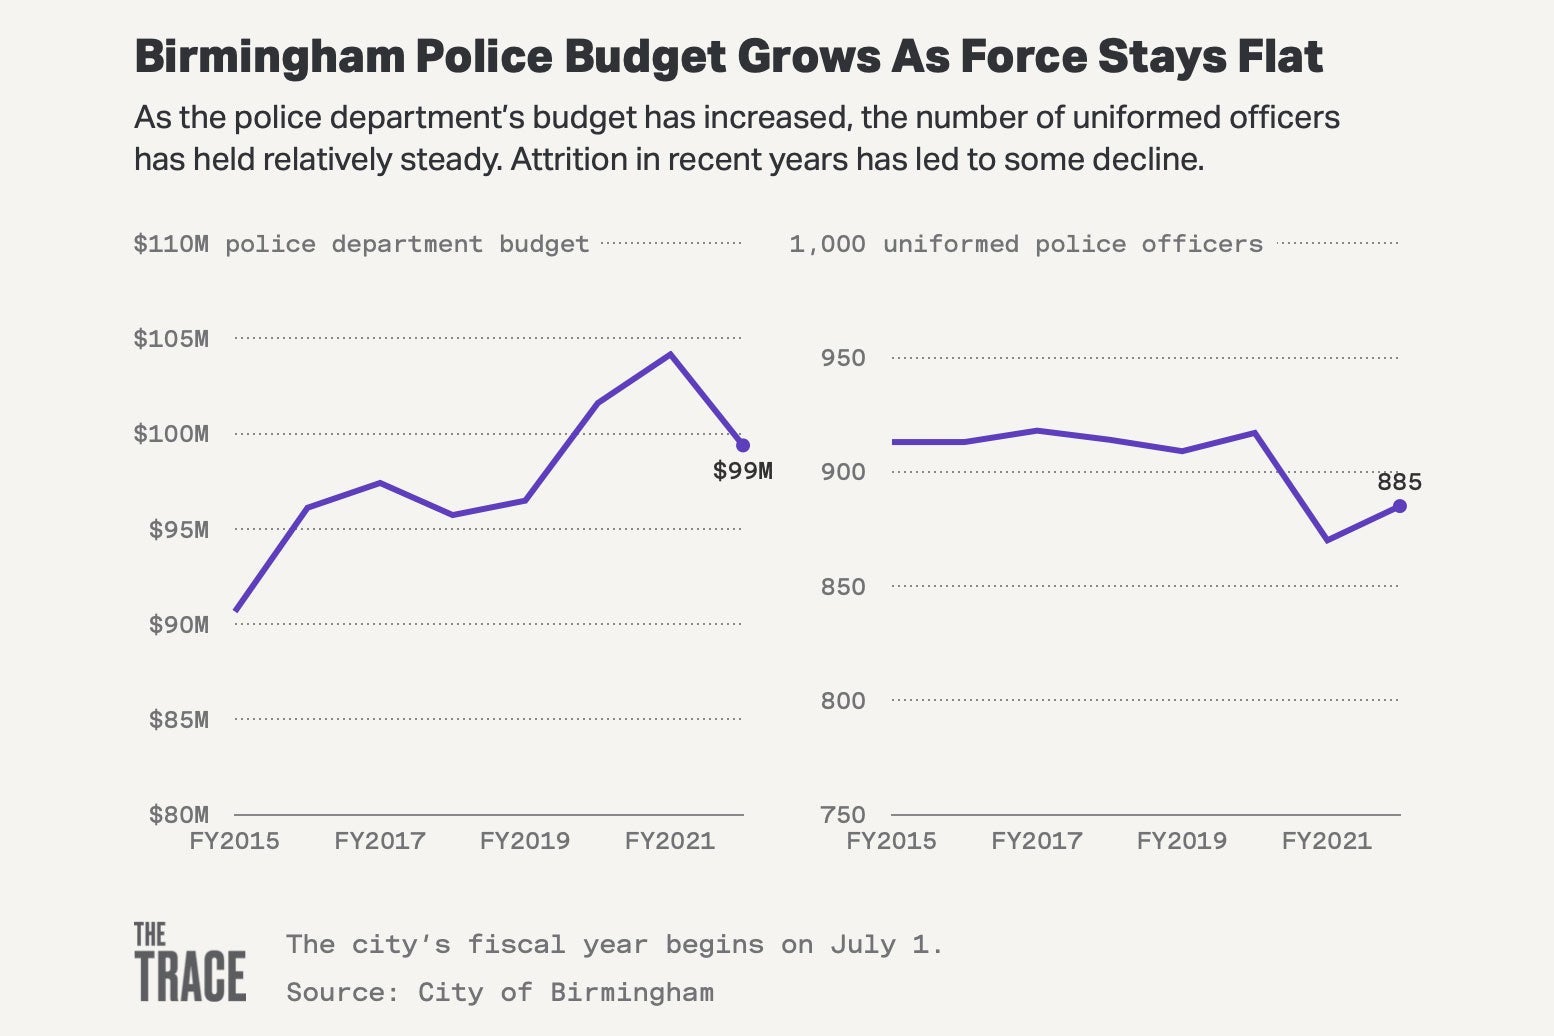 Charts track the police budget and number of officers.